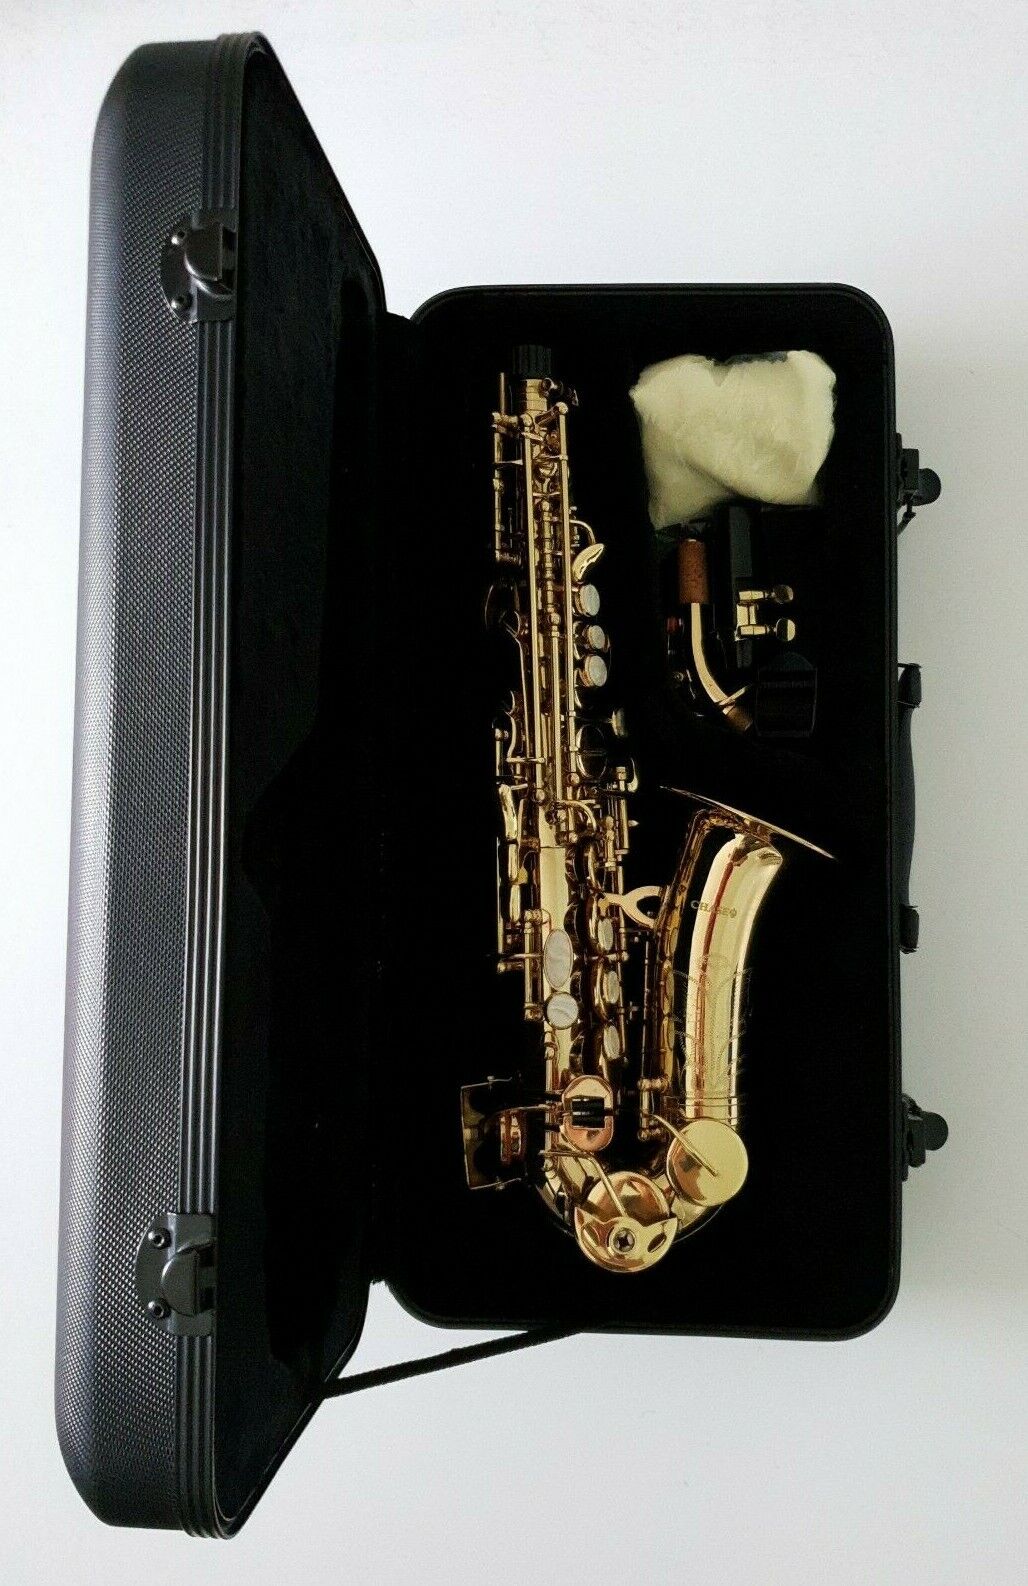 Saxophone Soprano Curved Shape in Bb Gold Finish + Hard Case Chase Outfit - - -